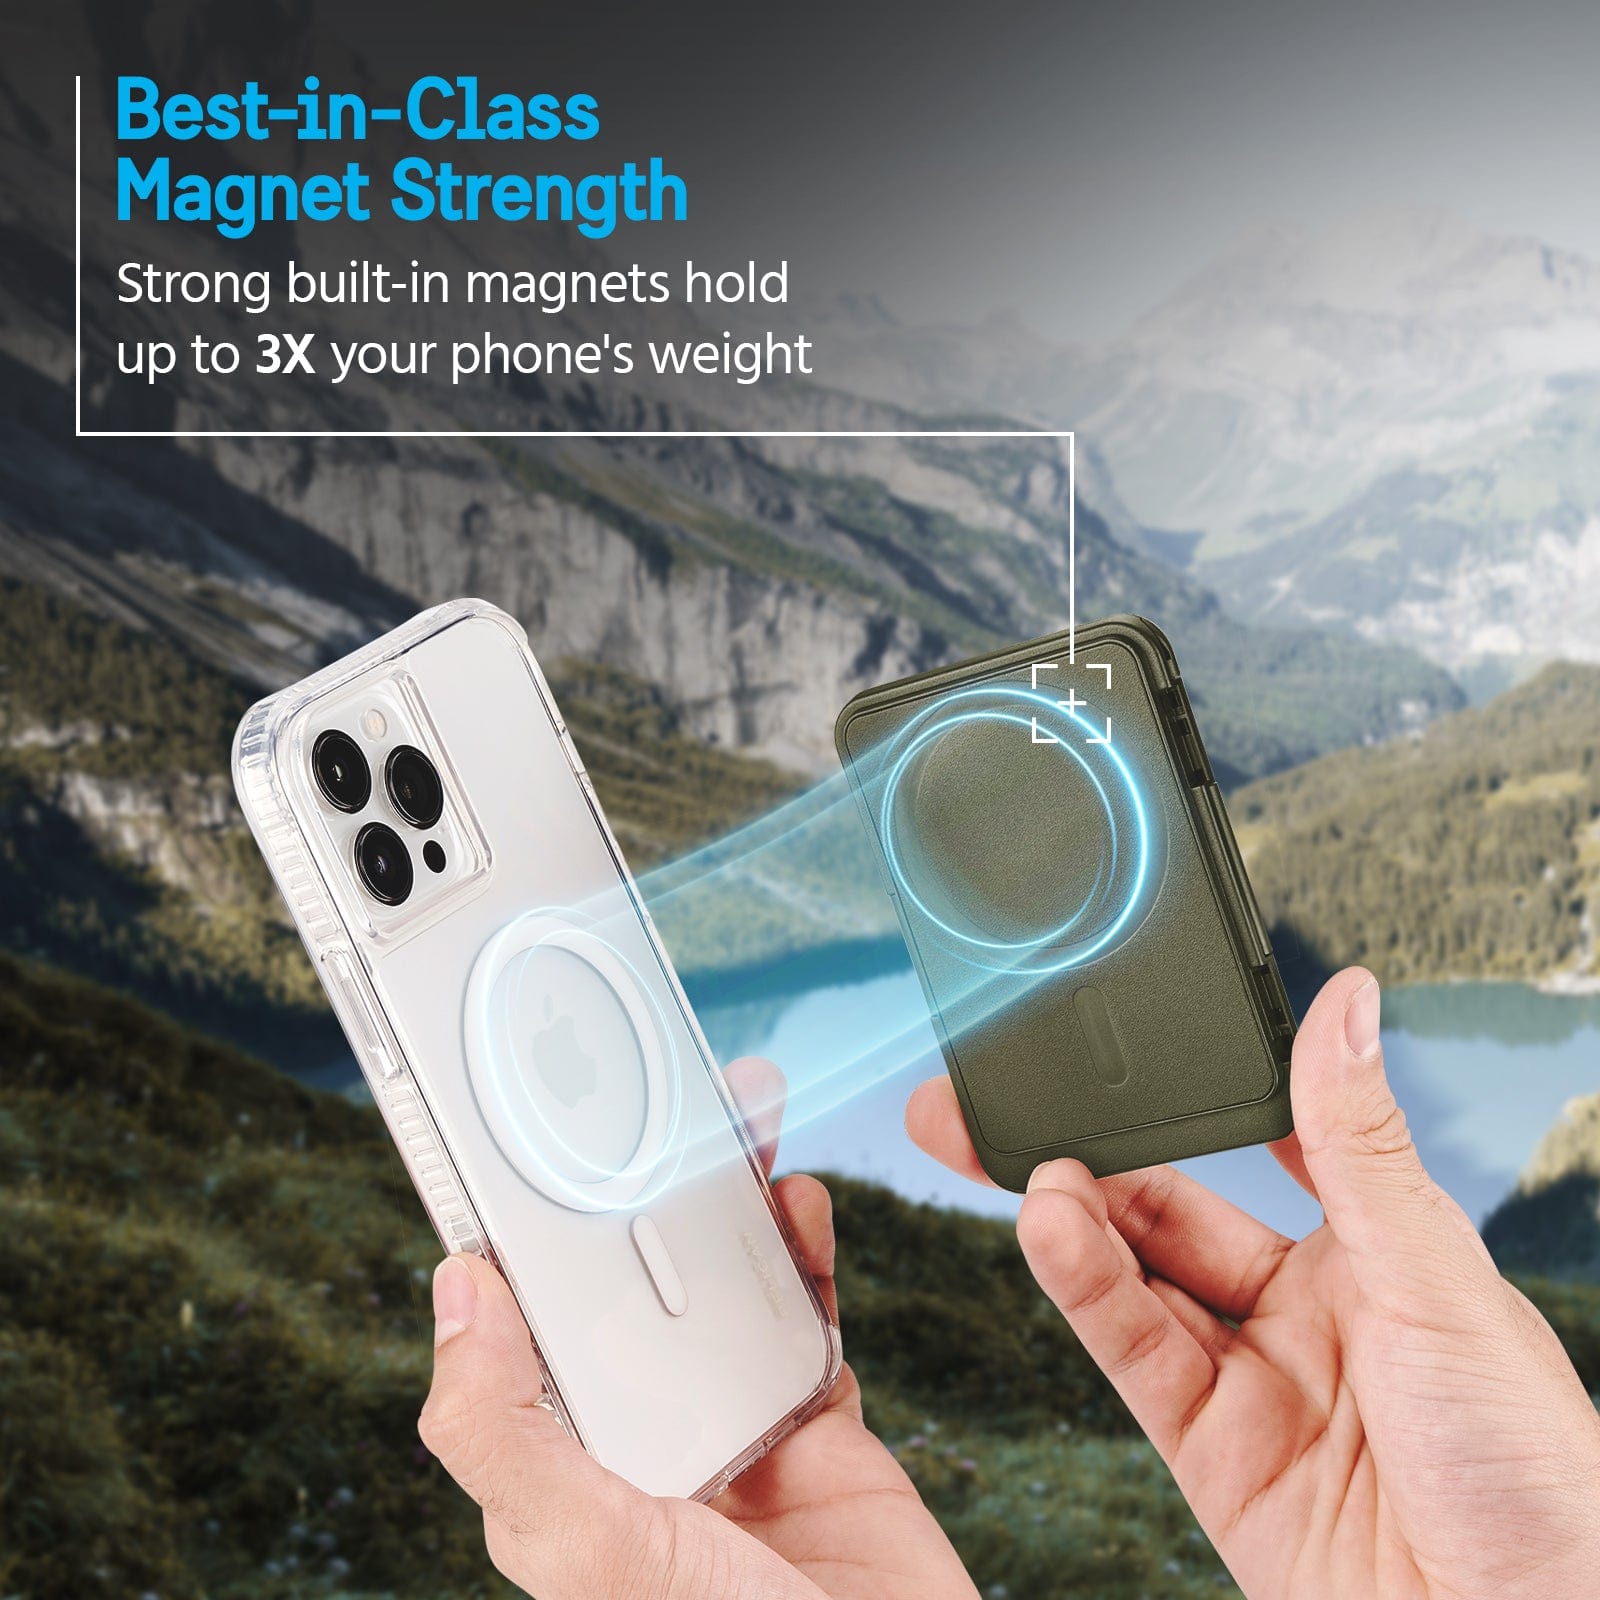 BEST-IN-CLASS MAGNET STRENGTH. STRONG BUILT-IN MAGNETS HOLD UP TO 3X YOUR PHONE'S WEIGHT.